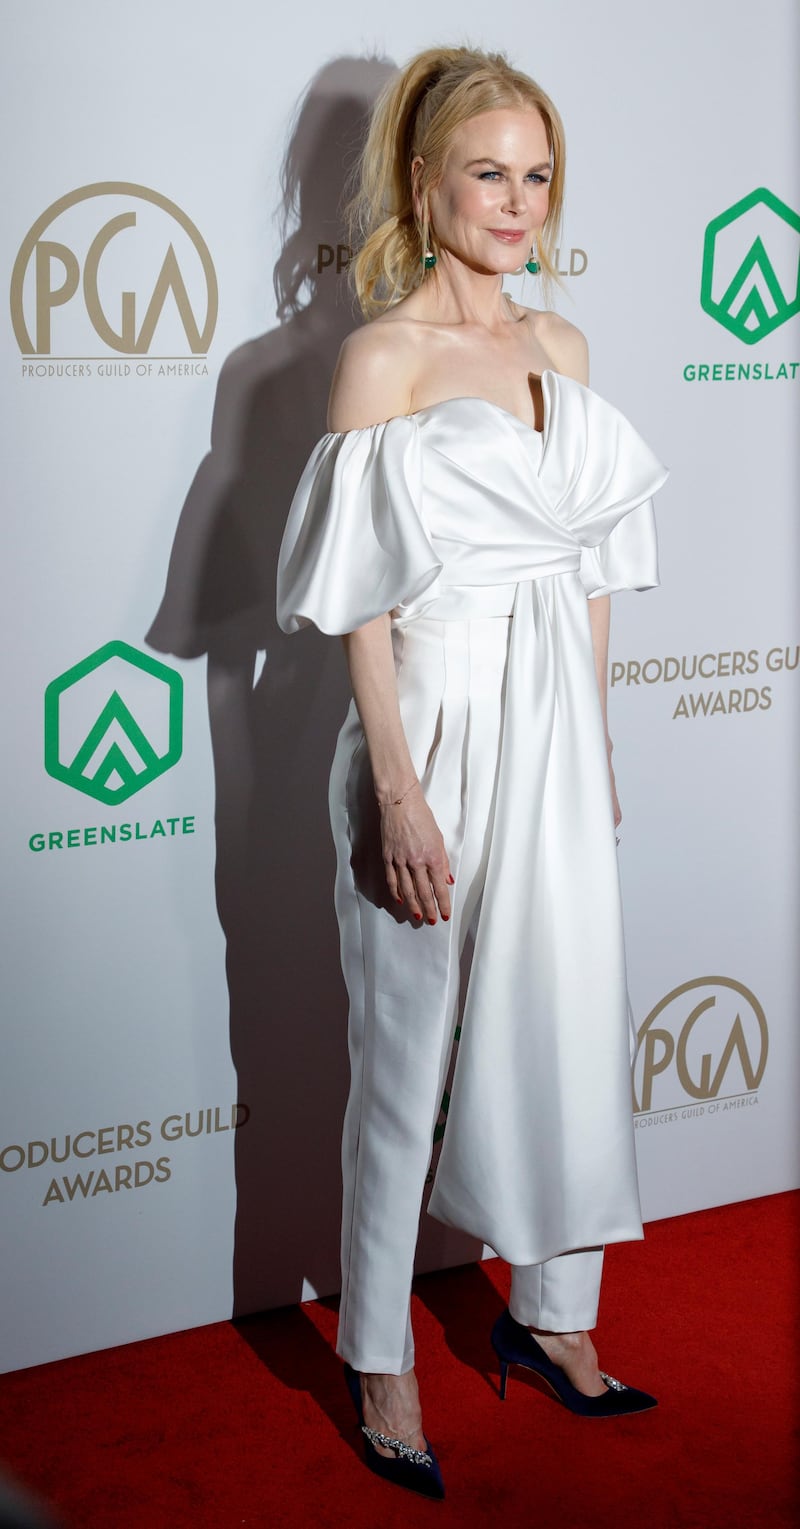 epa08140096 US-Australian actress Nicole Kidman arrives for the Producers Guild Awards 2020 in Hollywood, California, USA, 18 January 2020. The award ceremony honors the top films and movies from 2019.  EPA-EFE/EUGENE GARCIA